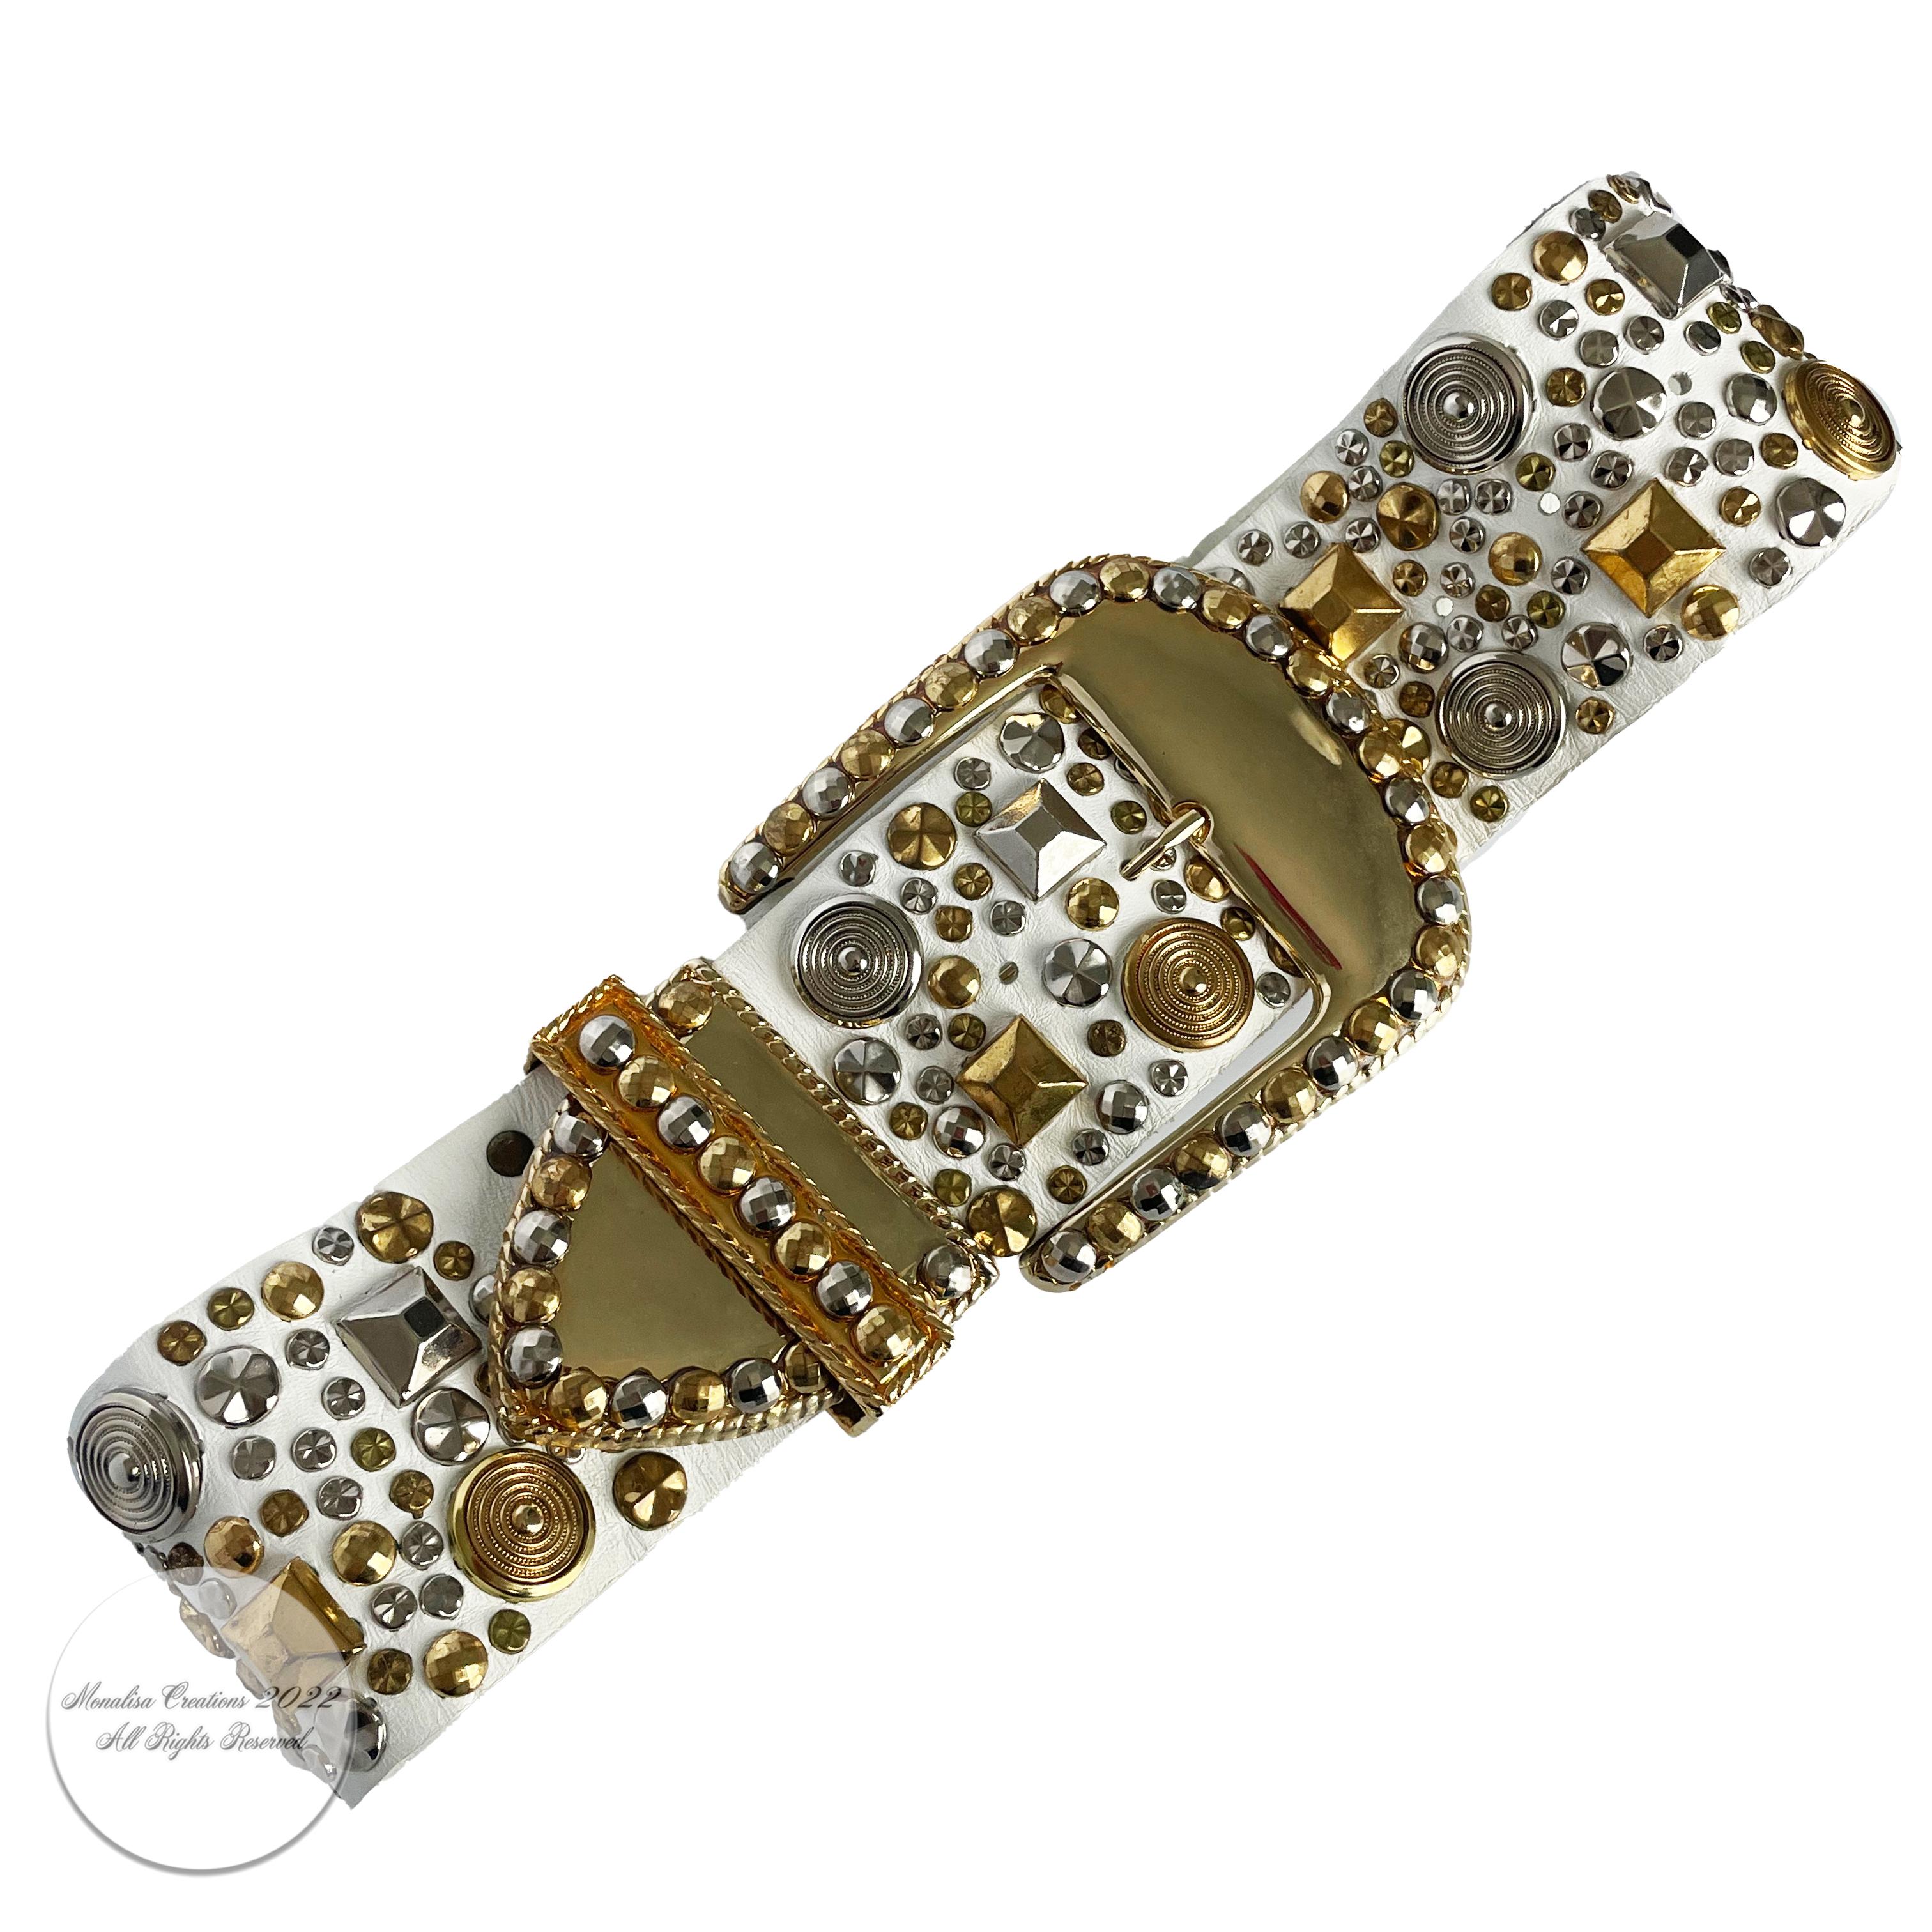 Vintage wide leather belt with studs, made by Michael Morrison MX most likely in the early 80s.  Definitely a rock-n-roll vibe with this piece! Made from white leather, it's embellished with brass and silver metal studs in various shapes and sizes. 